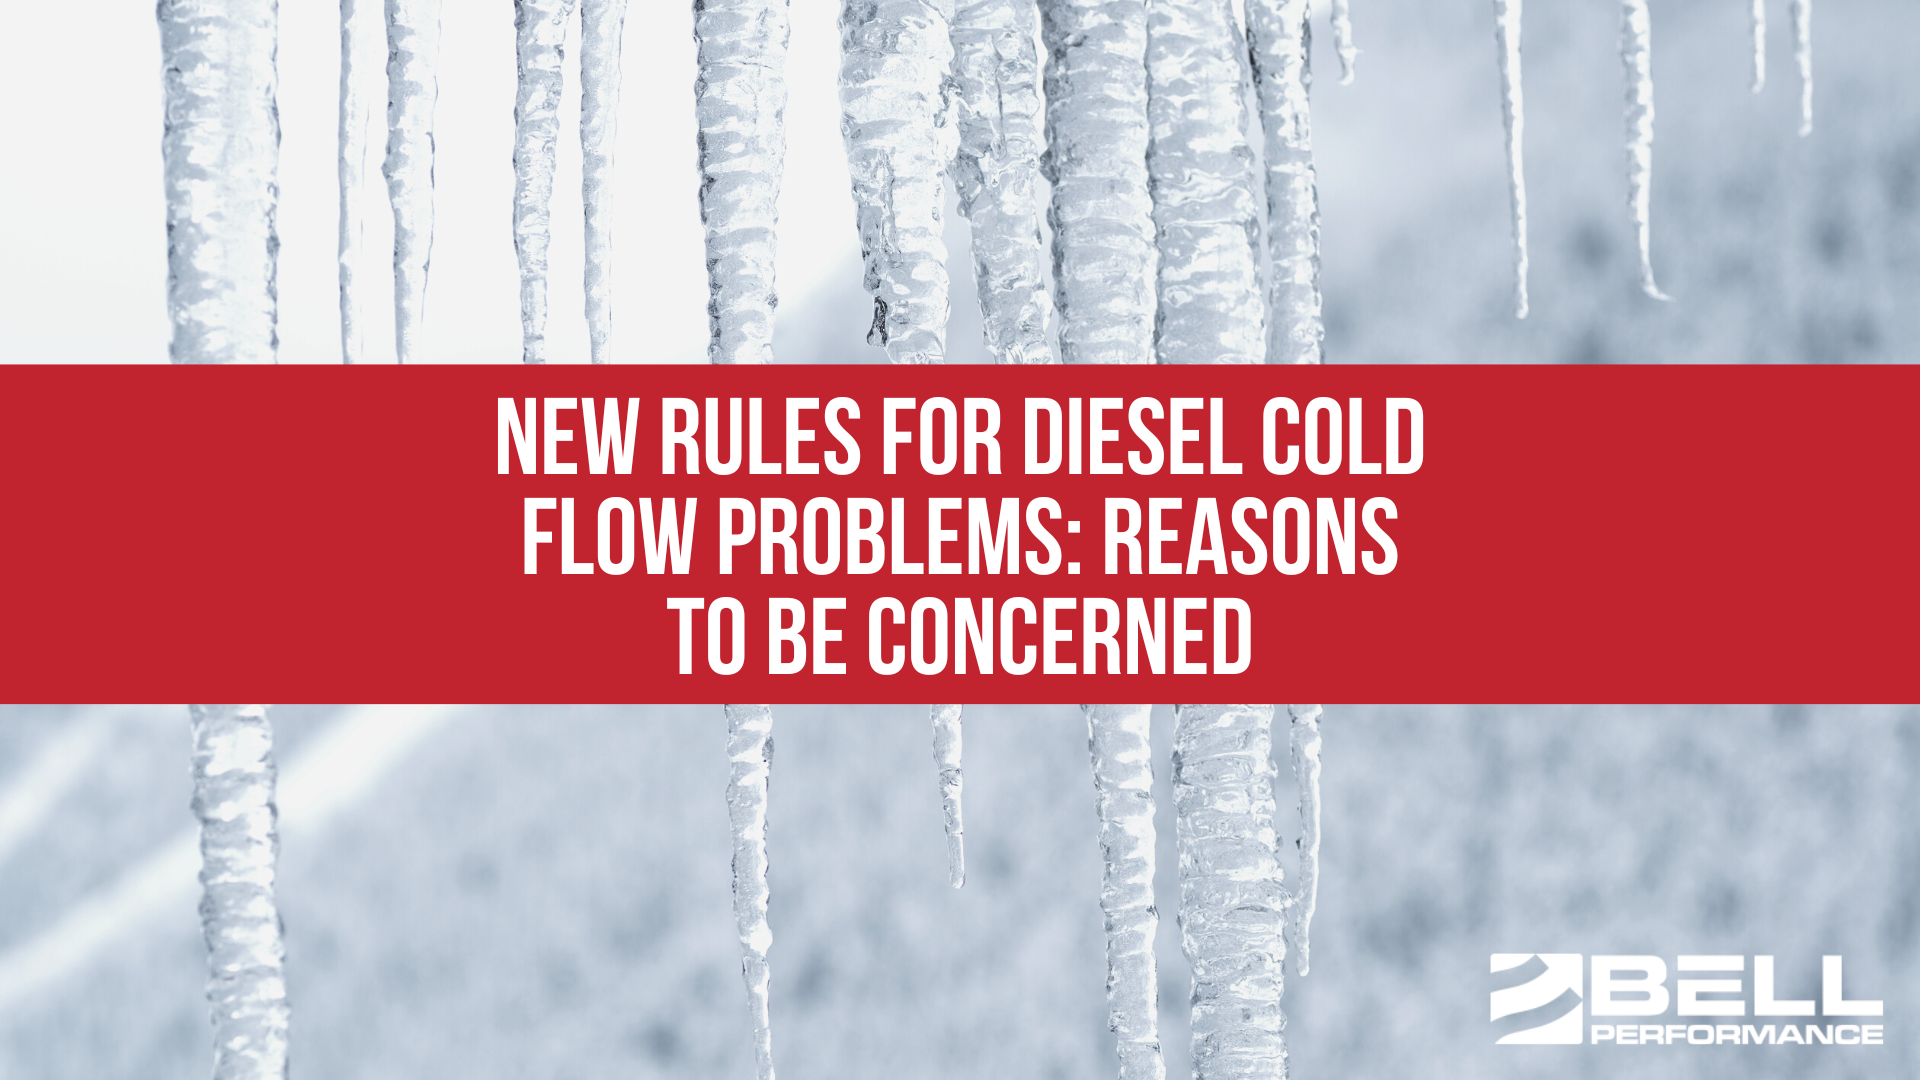 New rules for diesel cold flow problems: reasons to be concerned